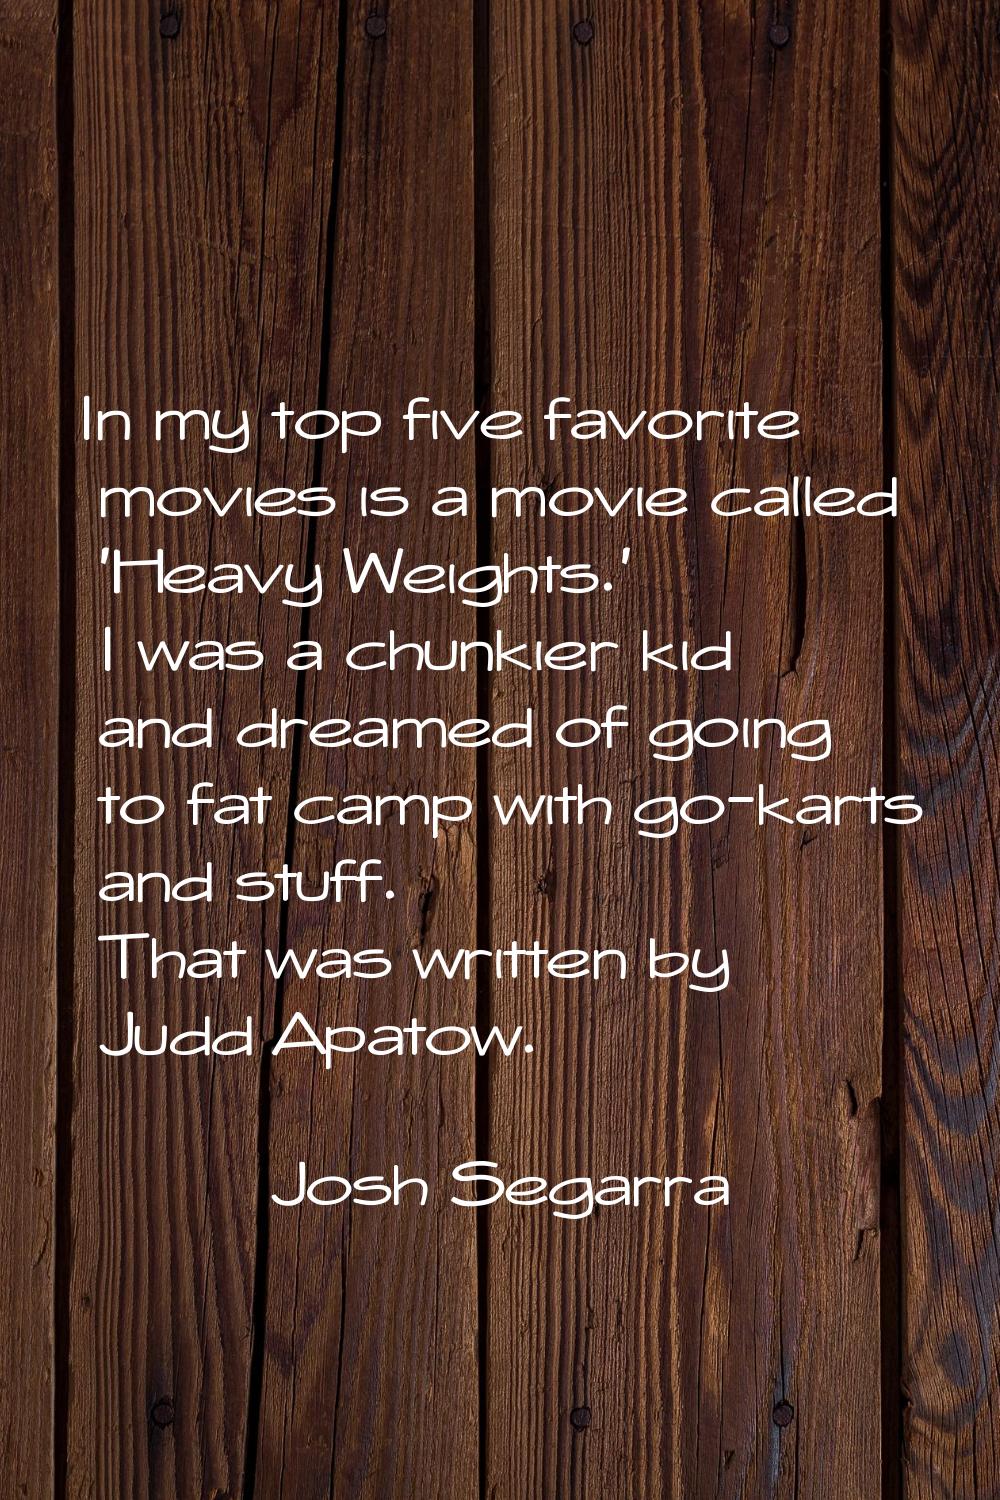 In my top five favorite movies is a movie called 'Heavy Weights.' I was a chunkier kid and dreamed 